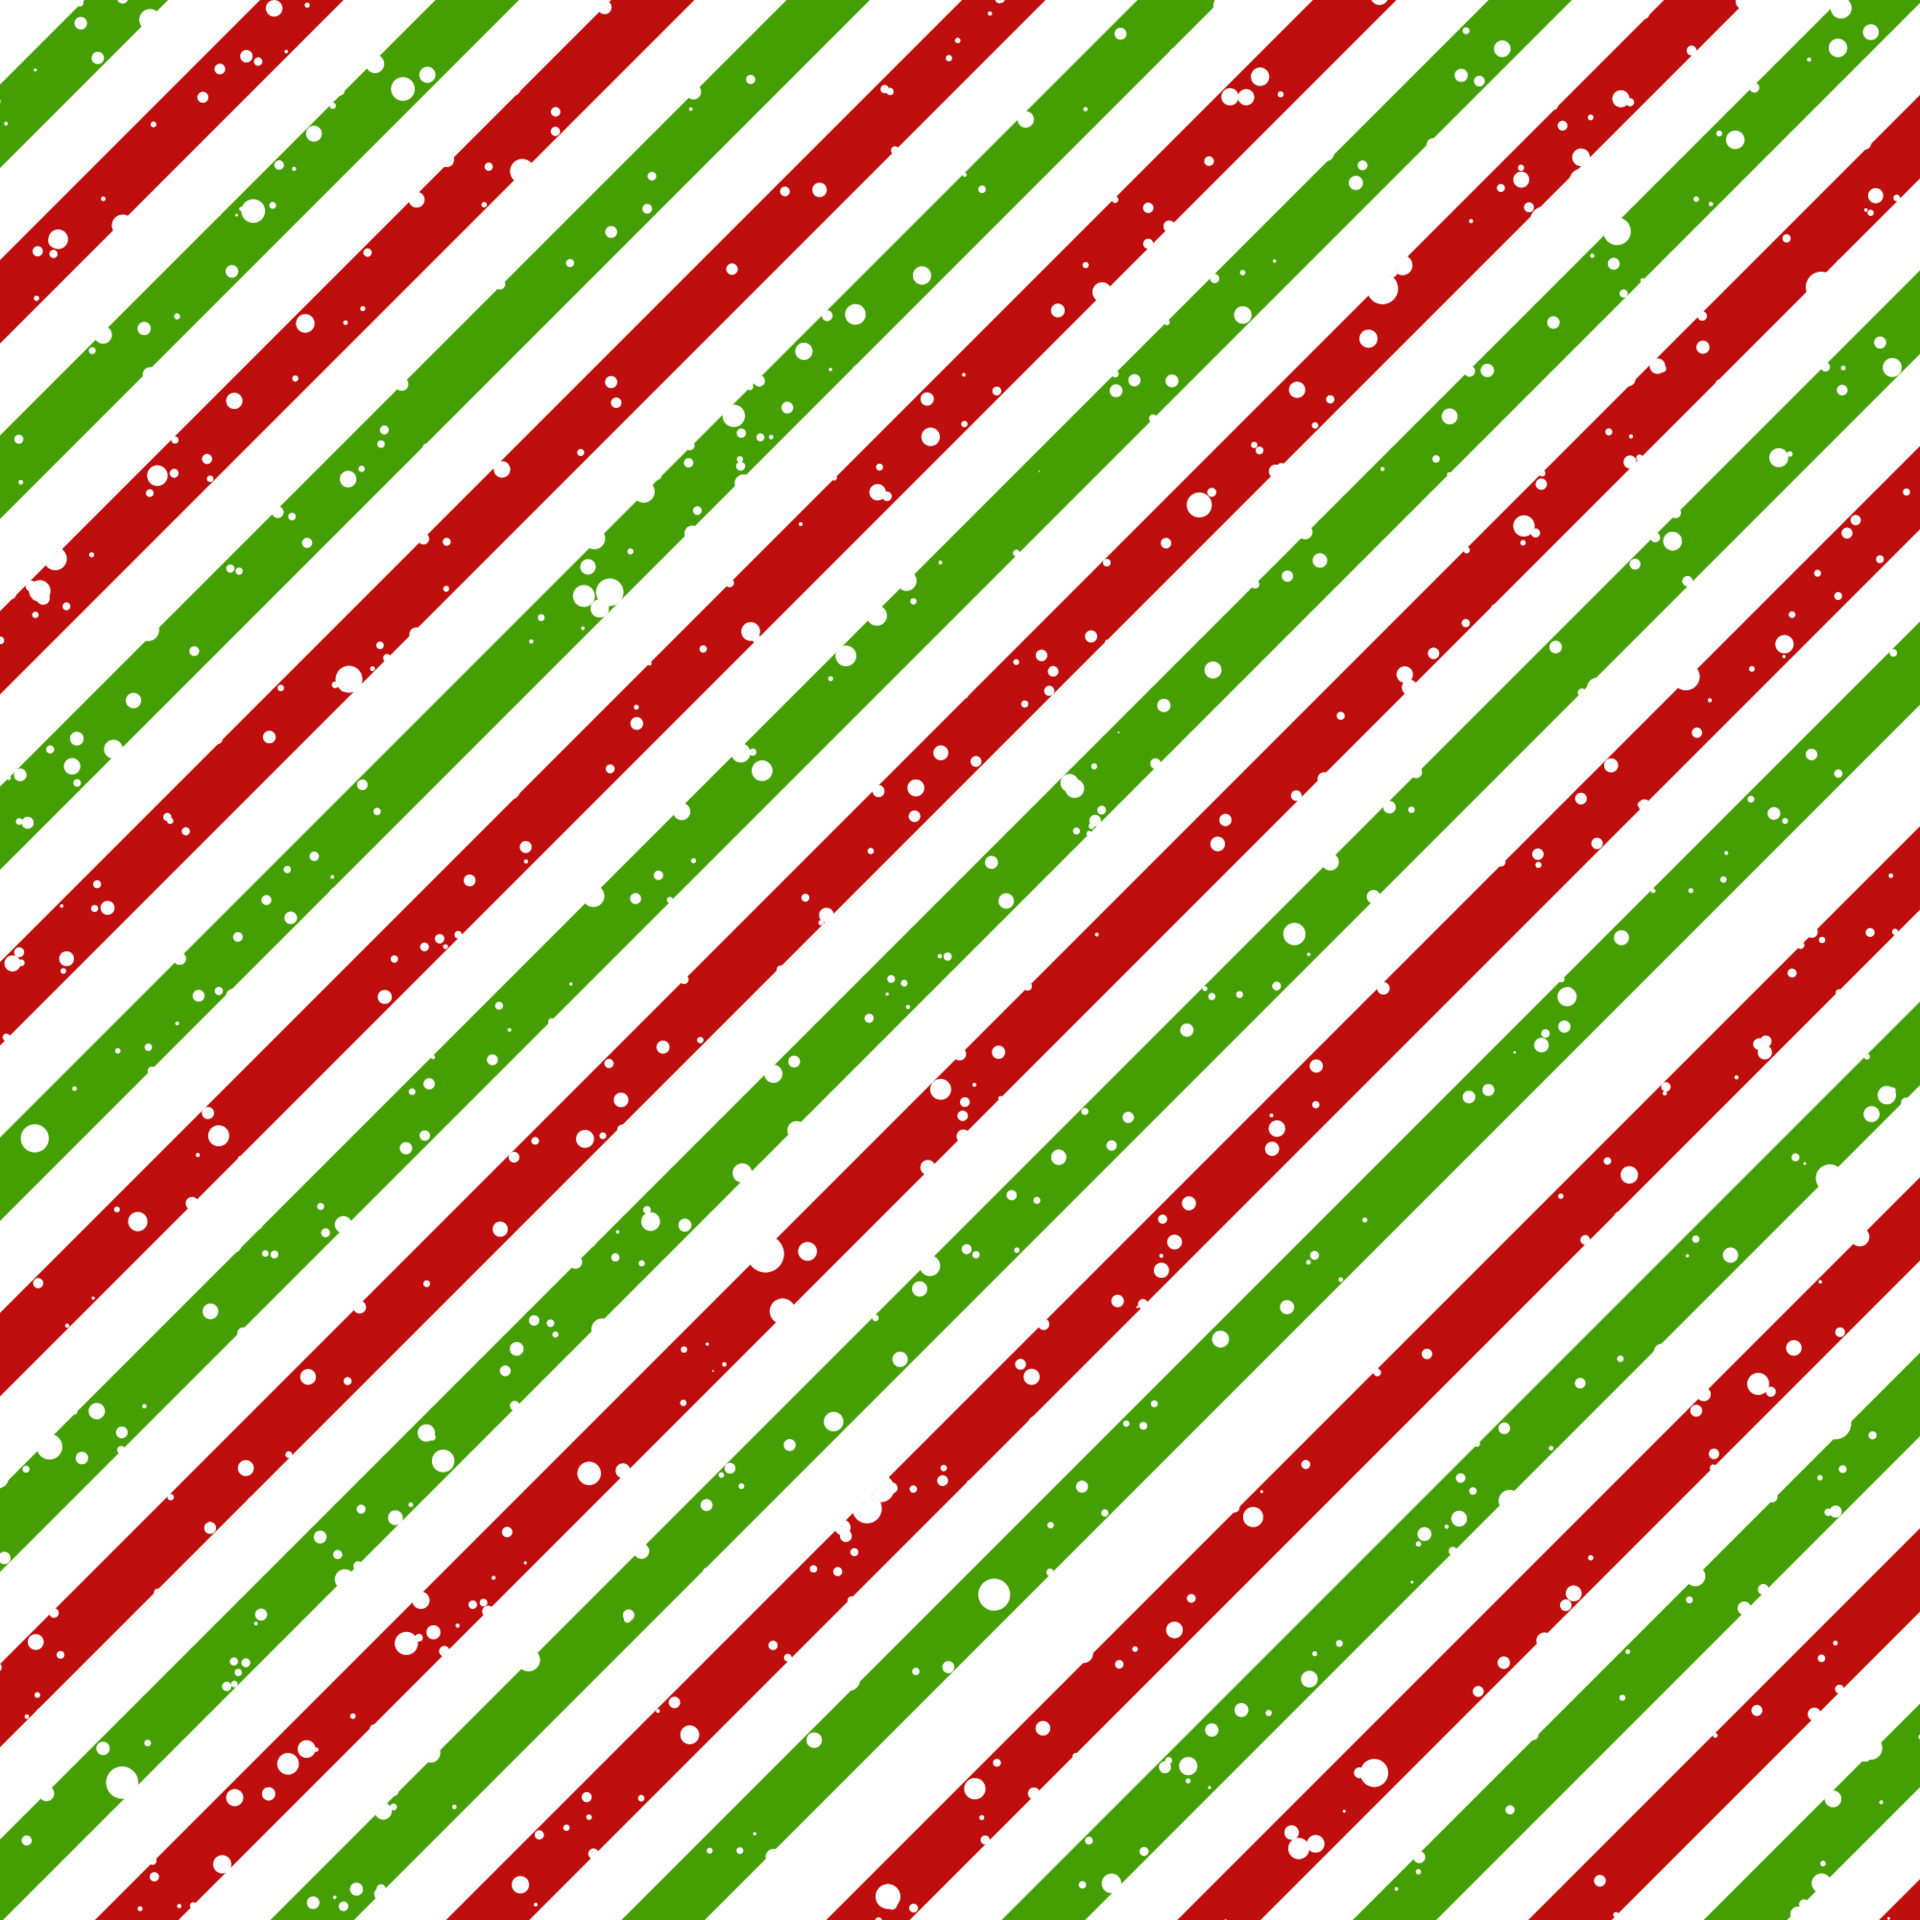 Christmas diagonal striped red and green lines on white background with snow texture, Vector